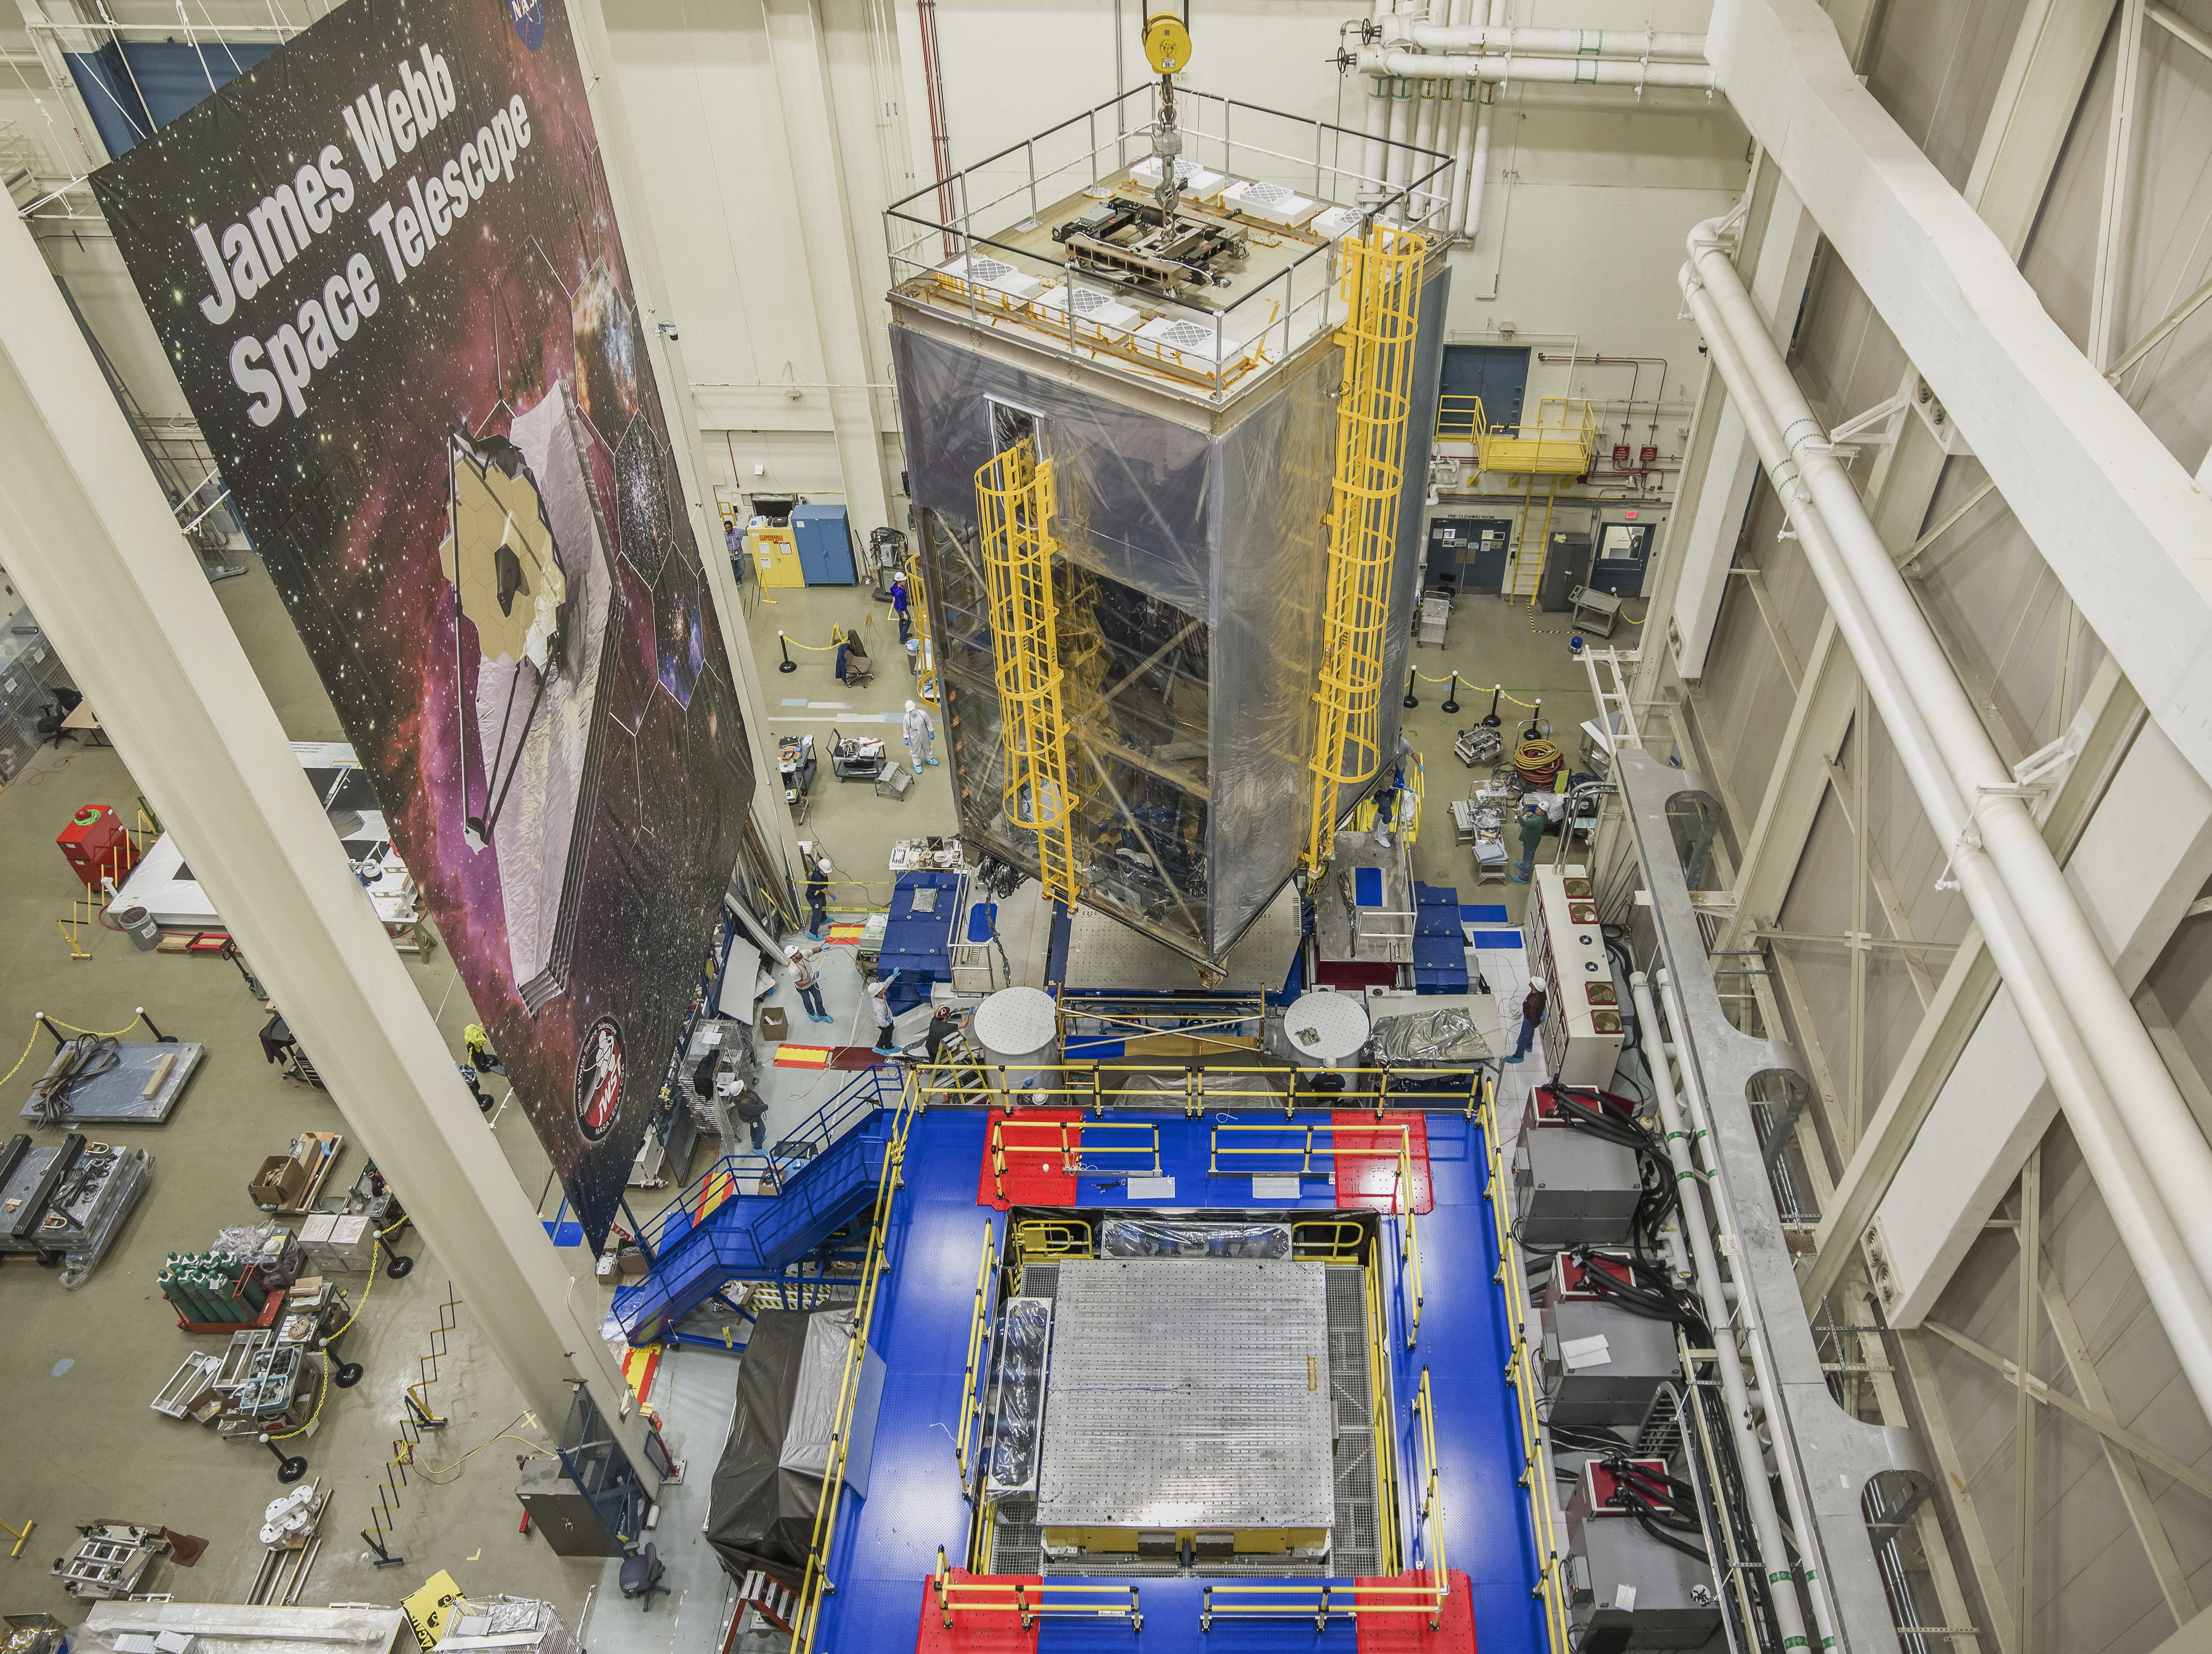 NASA engineers and technicians perform vibration testing on the James Webb Space Telescope.